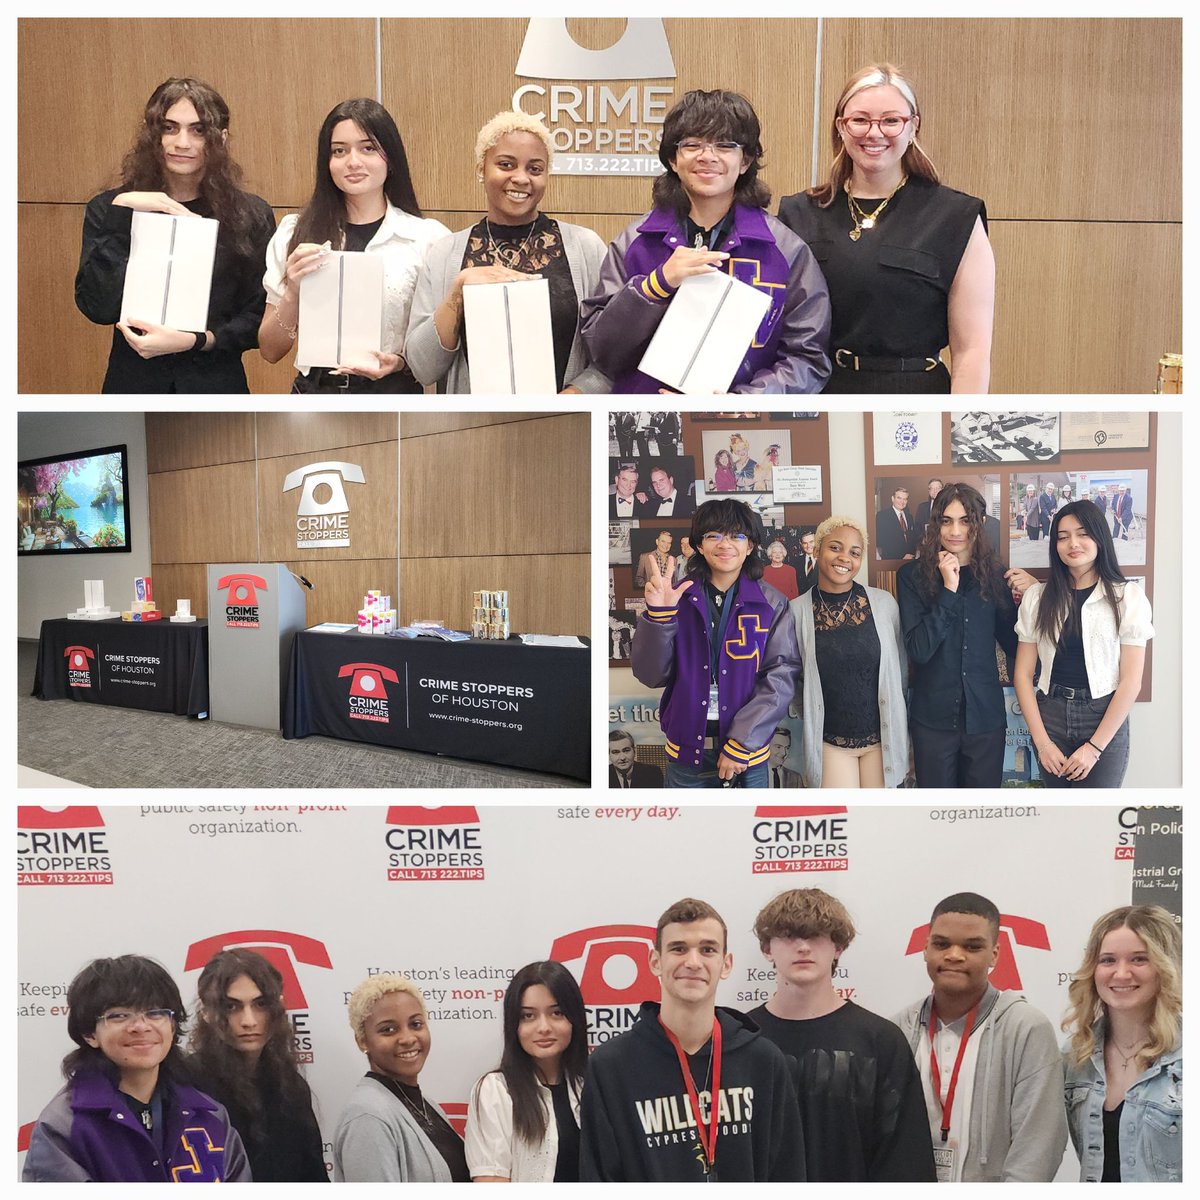 Congrats @JerseyVillageHS @JVTVNews who won 1st place in the @CrimeStopHOU PSA contest. Thank you @TXAFawareness Lynda Irvine for sharing your story. Together we can help people say NO!!! #lovemyvillage. Shout out to our friends @CyWoods212 who were also recognized today.